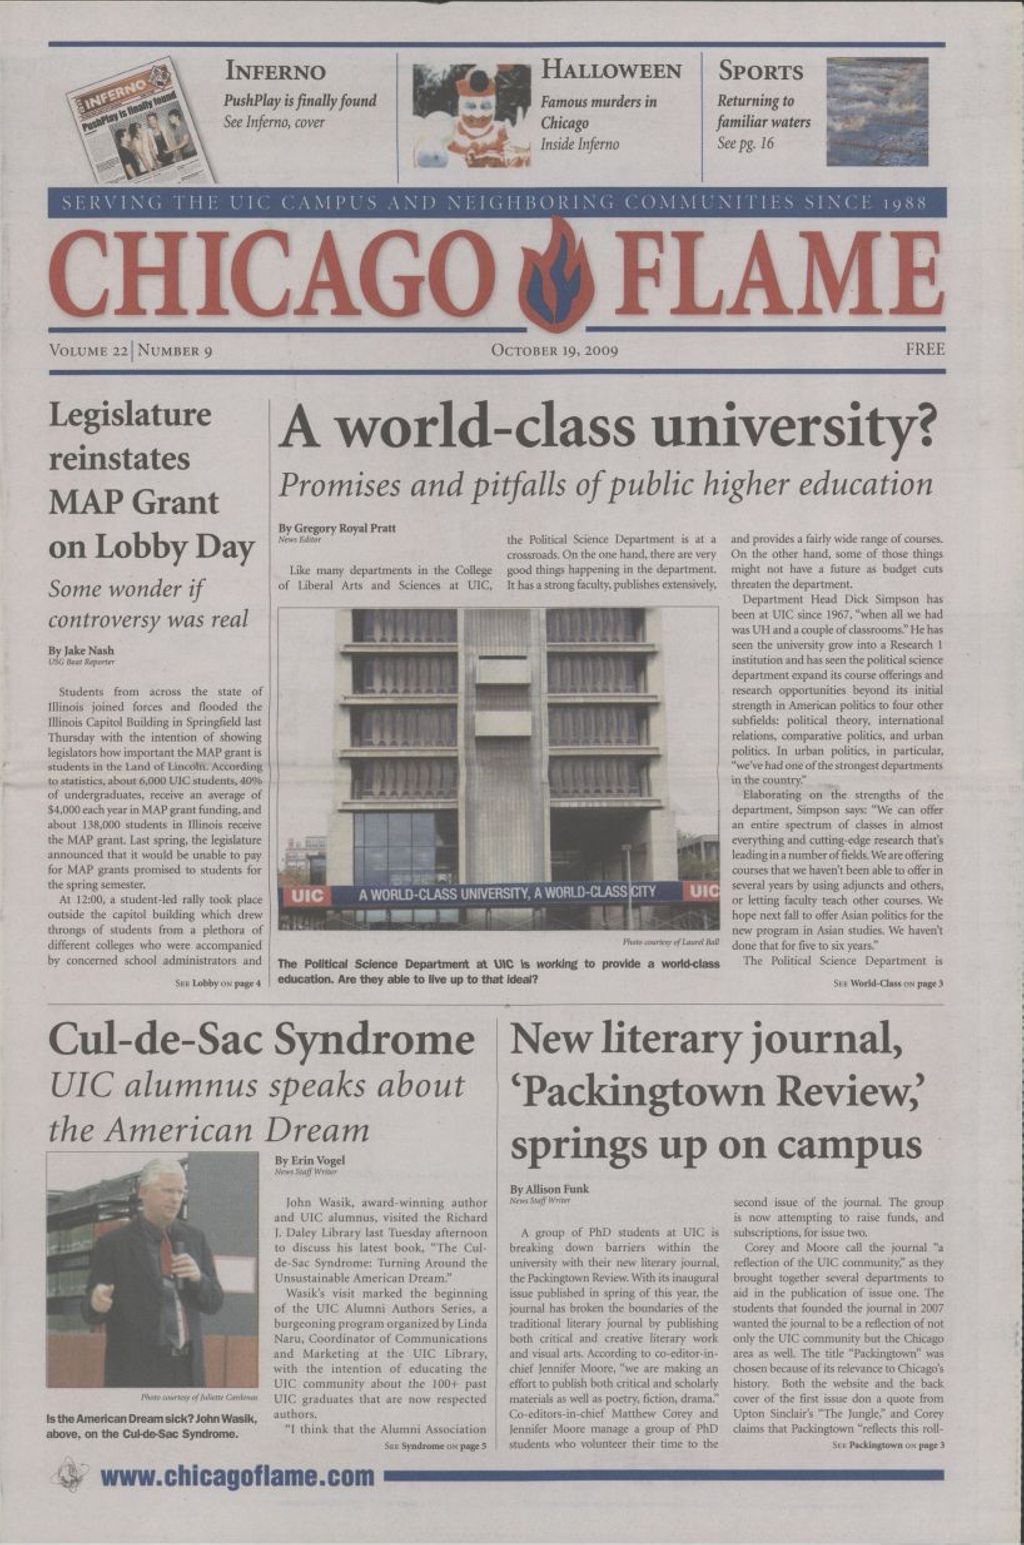 Miniature of Chicago Flame (October 19, 2009)